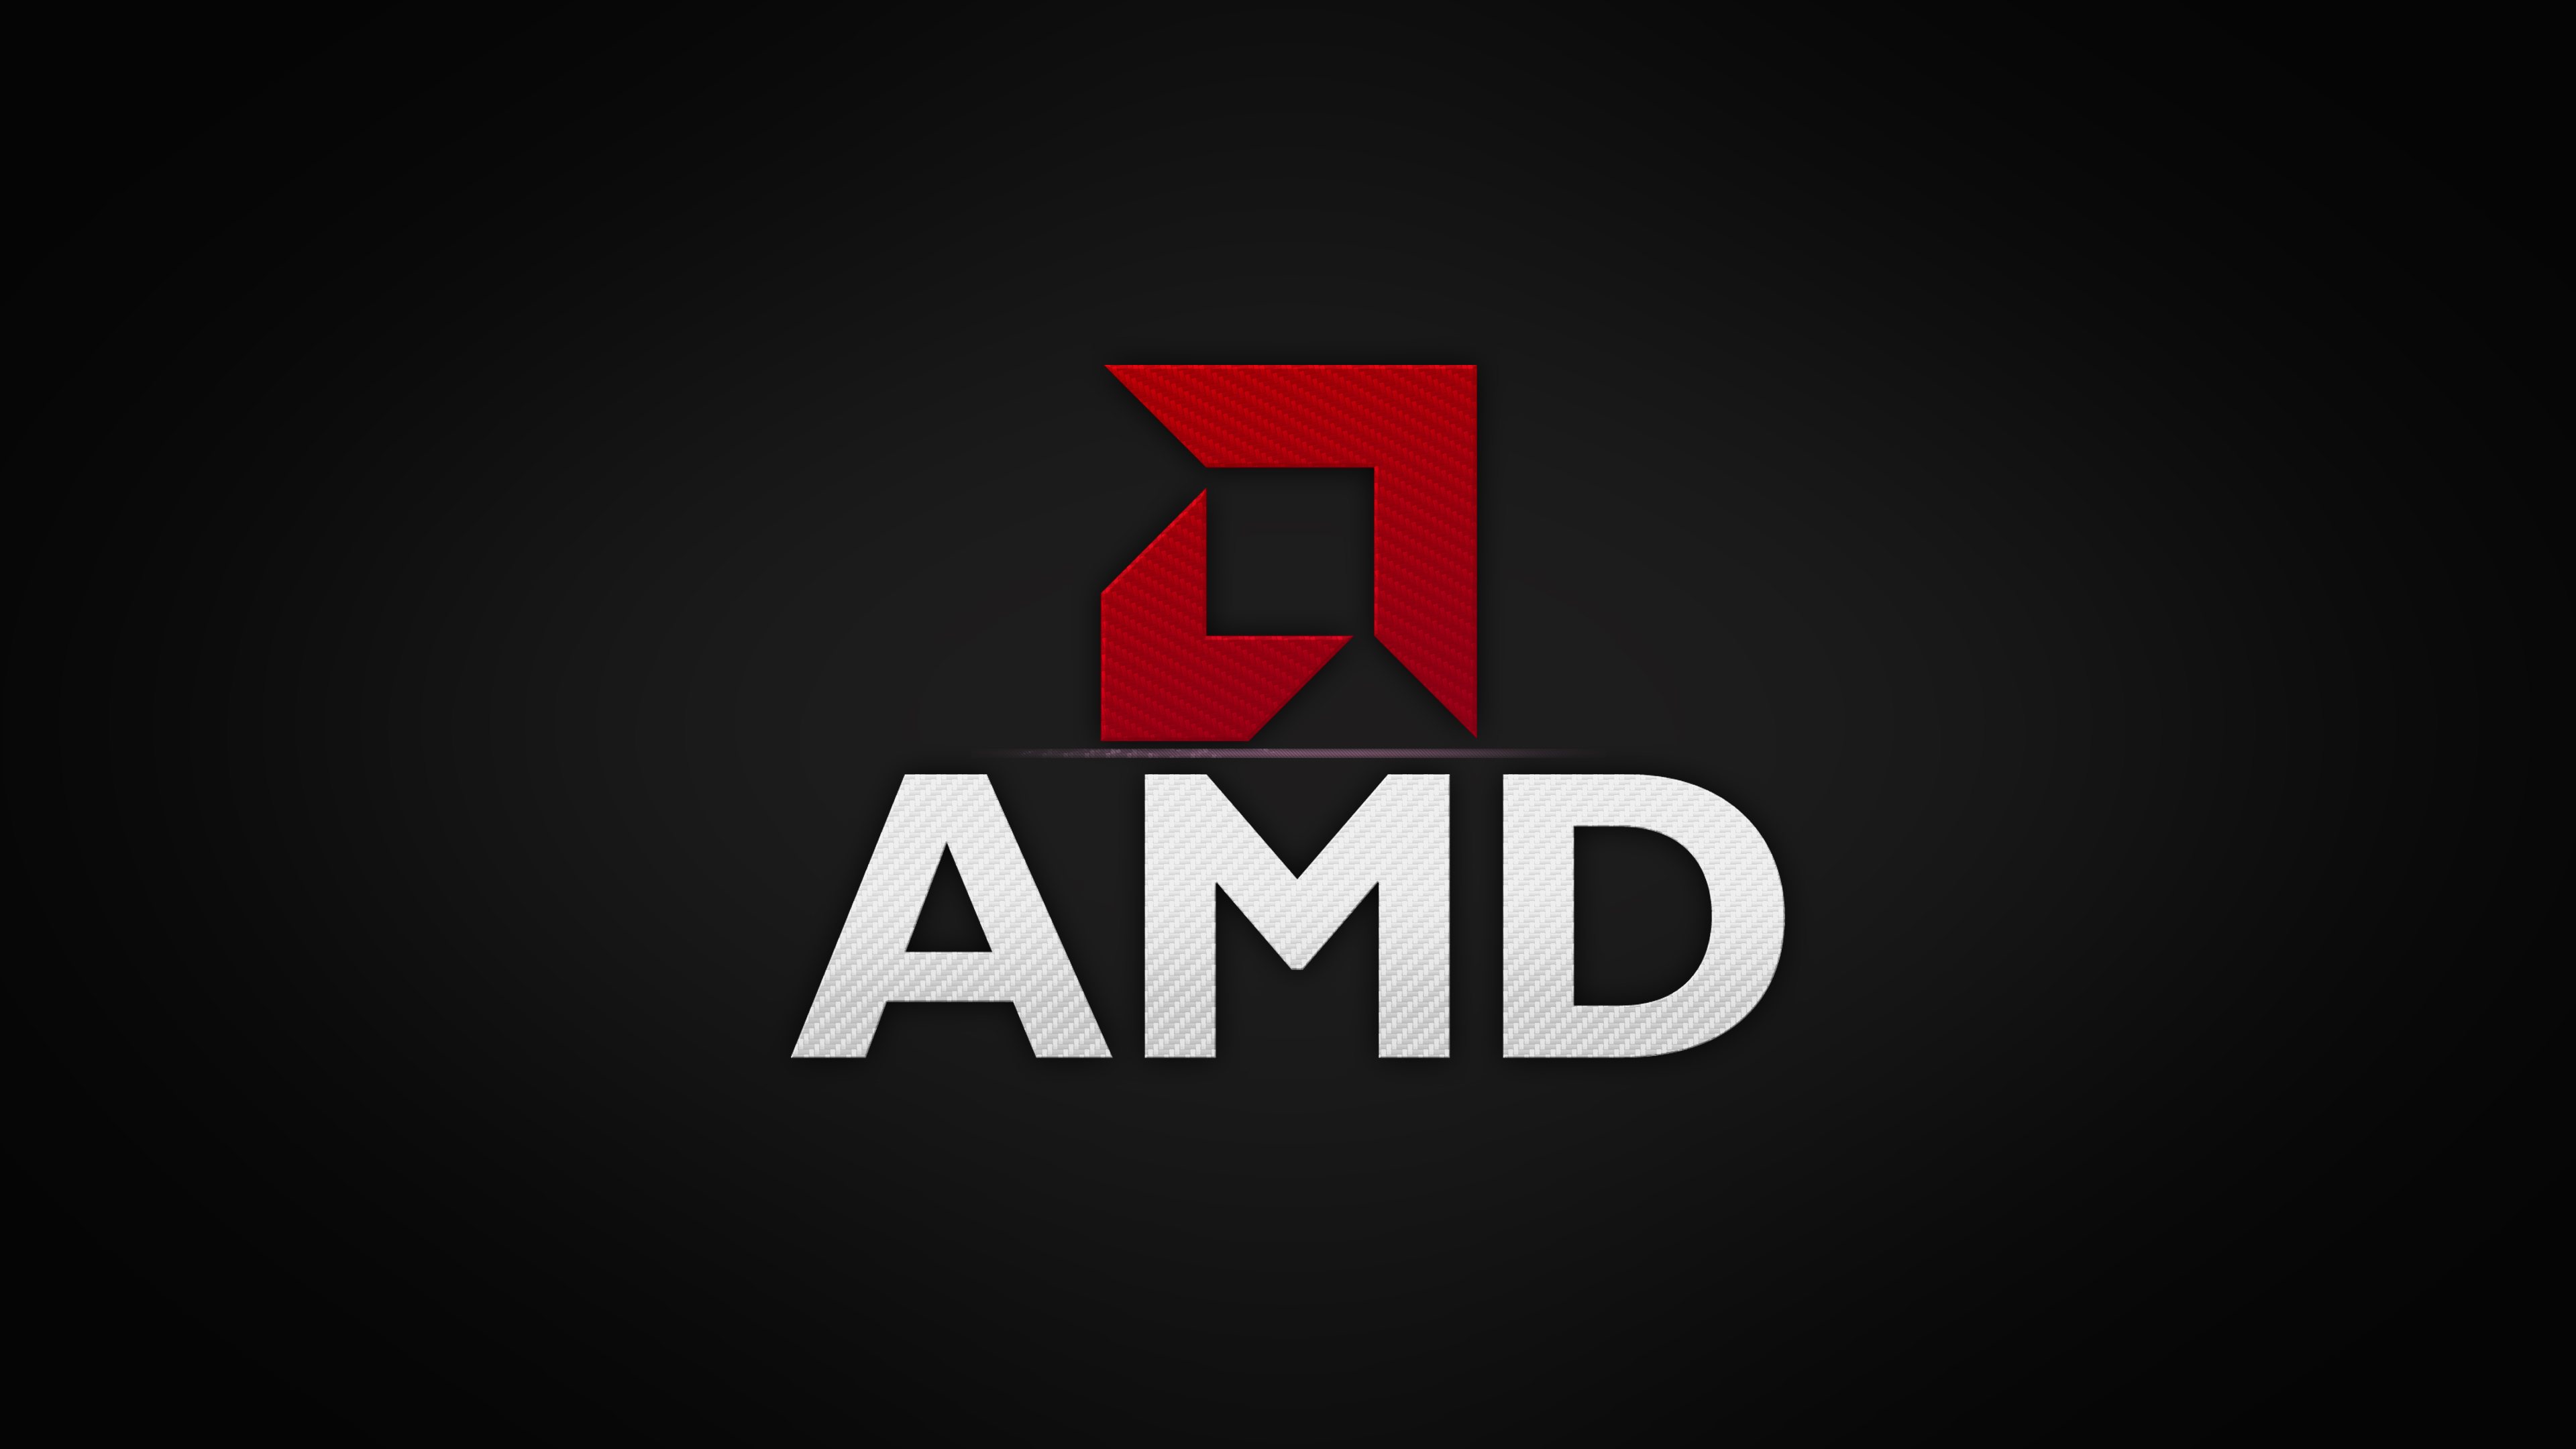 19x1080 Amd 4k Laptop Full Hd 1080p Hd 4k Wallpapers Images Backgrounds Photos And Pictures